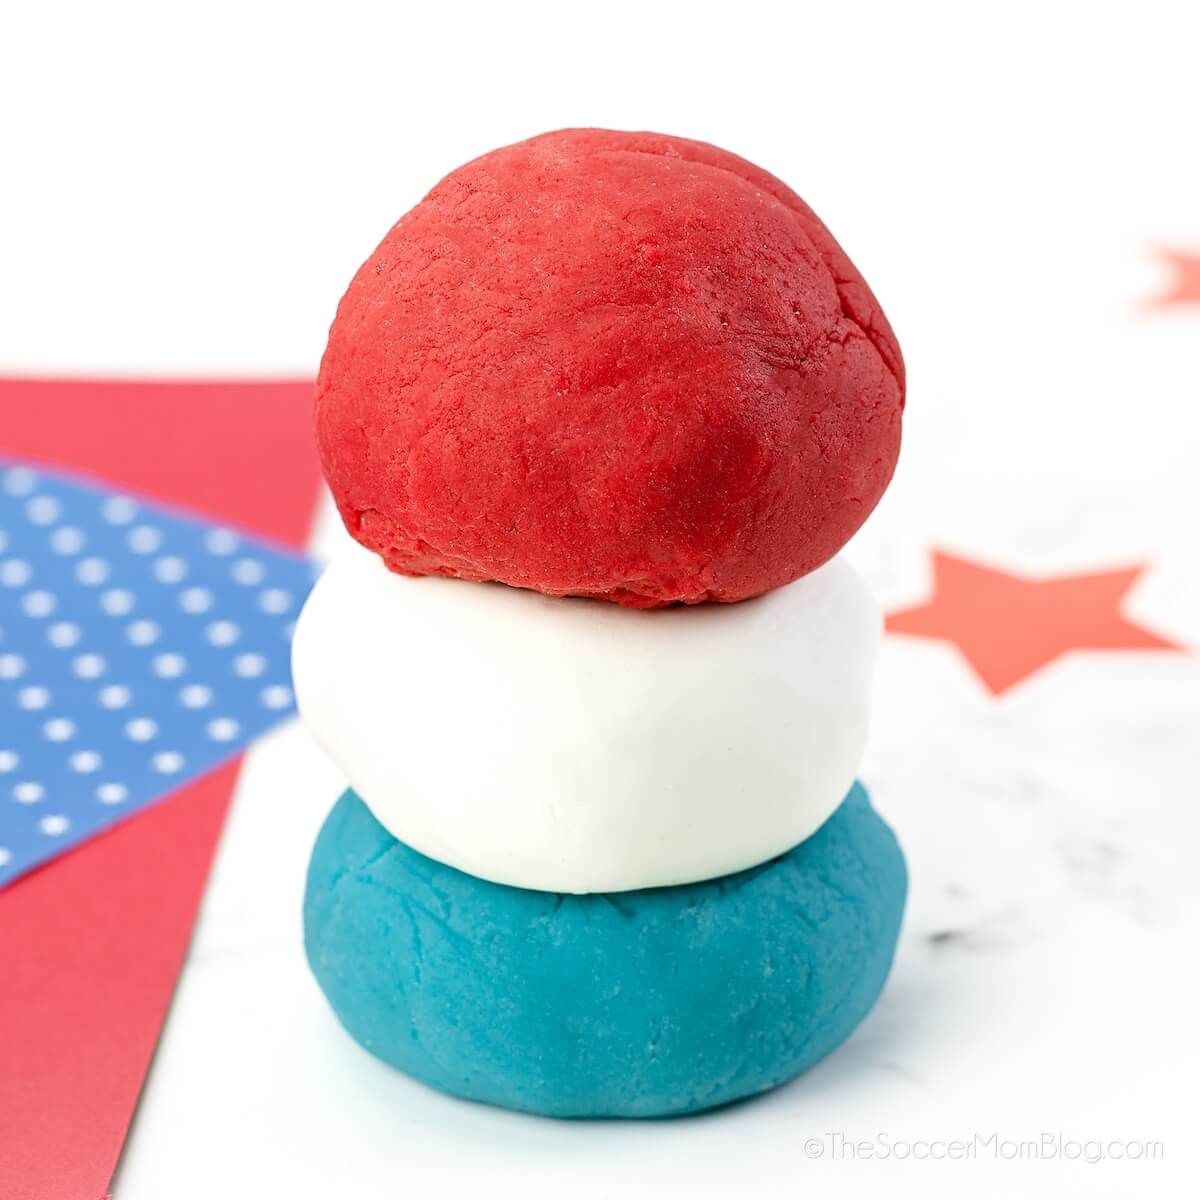 three balls of playdough stacked: red, white, and blue colors